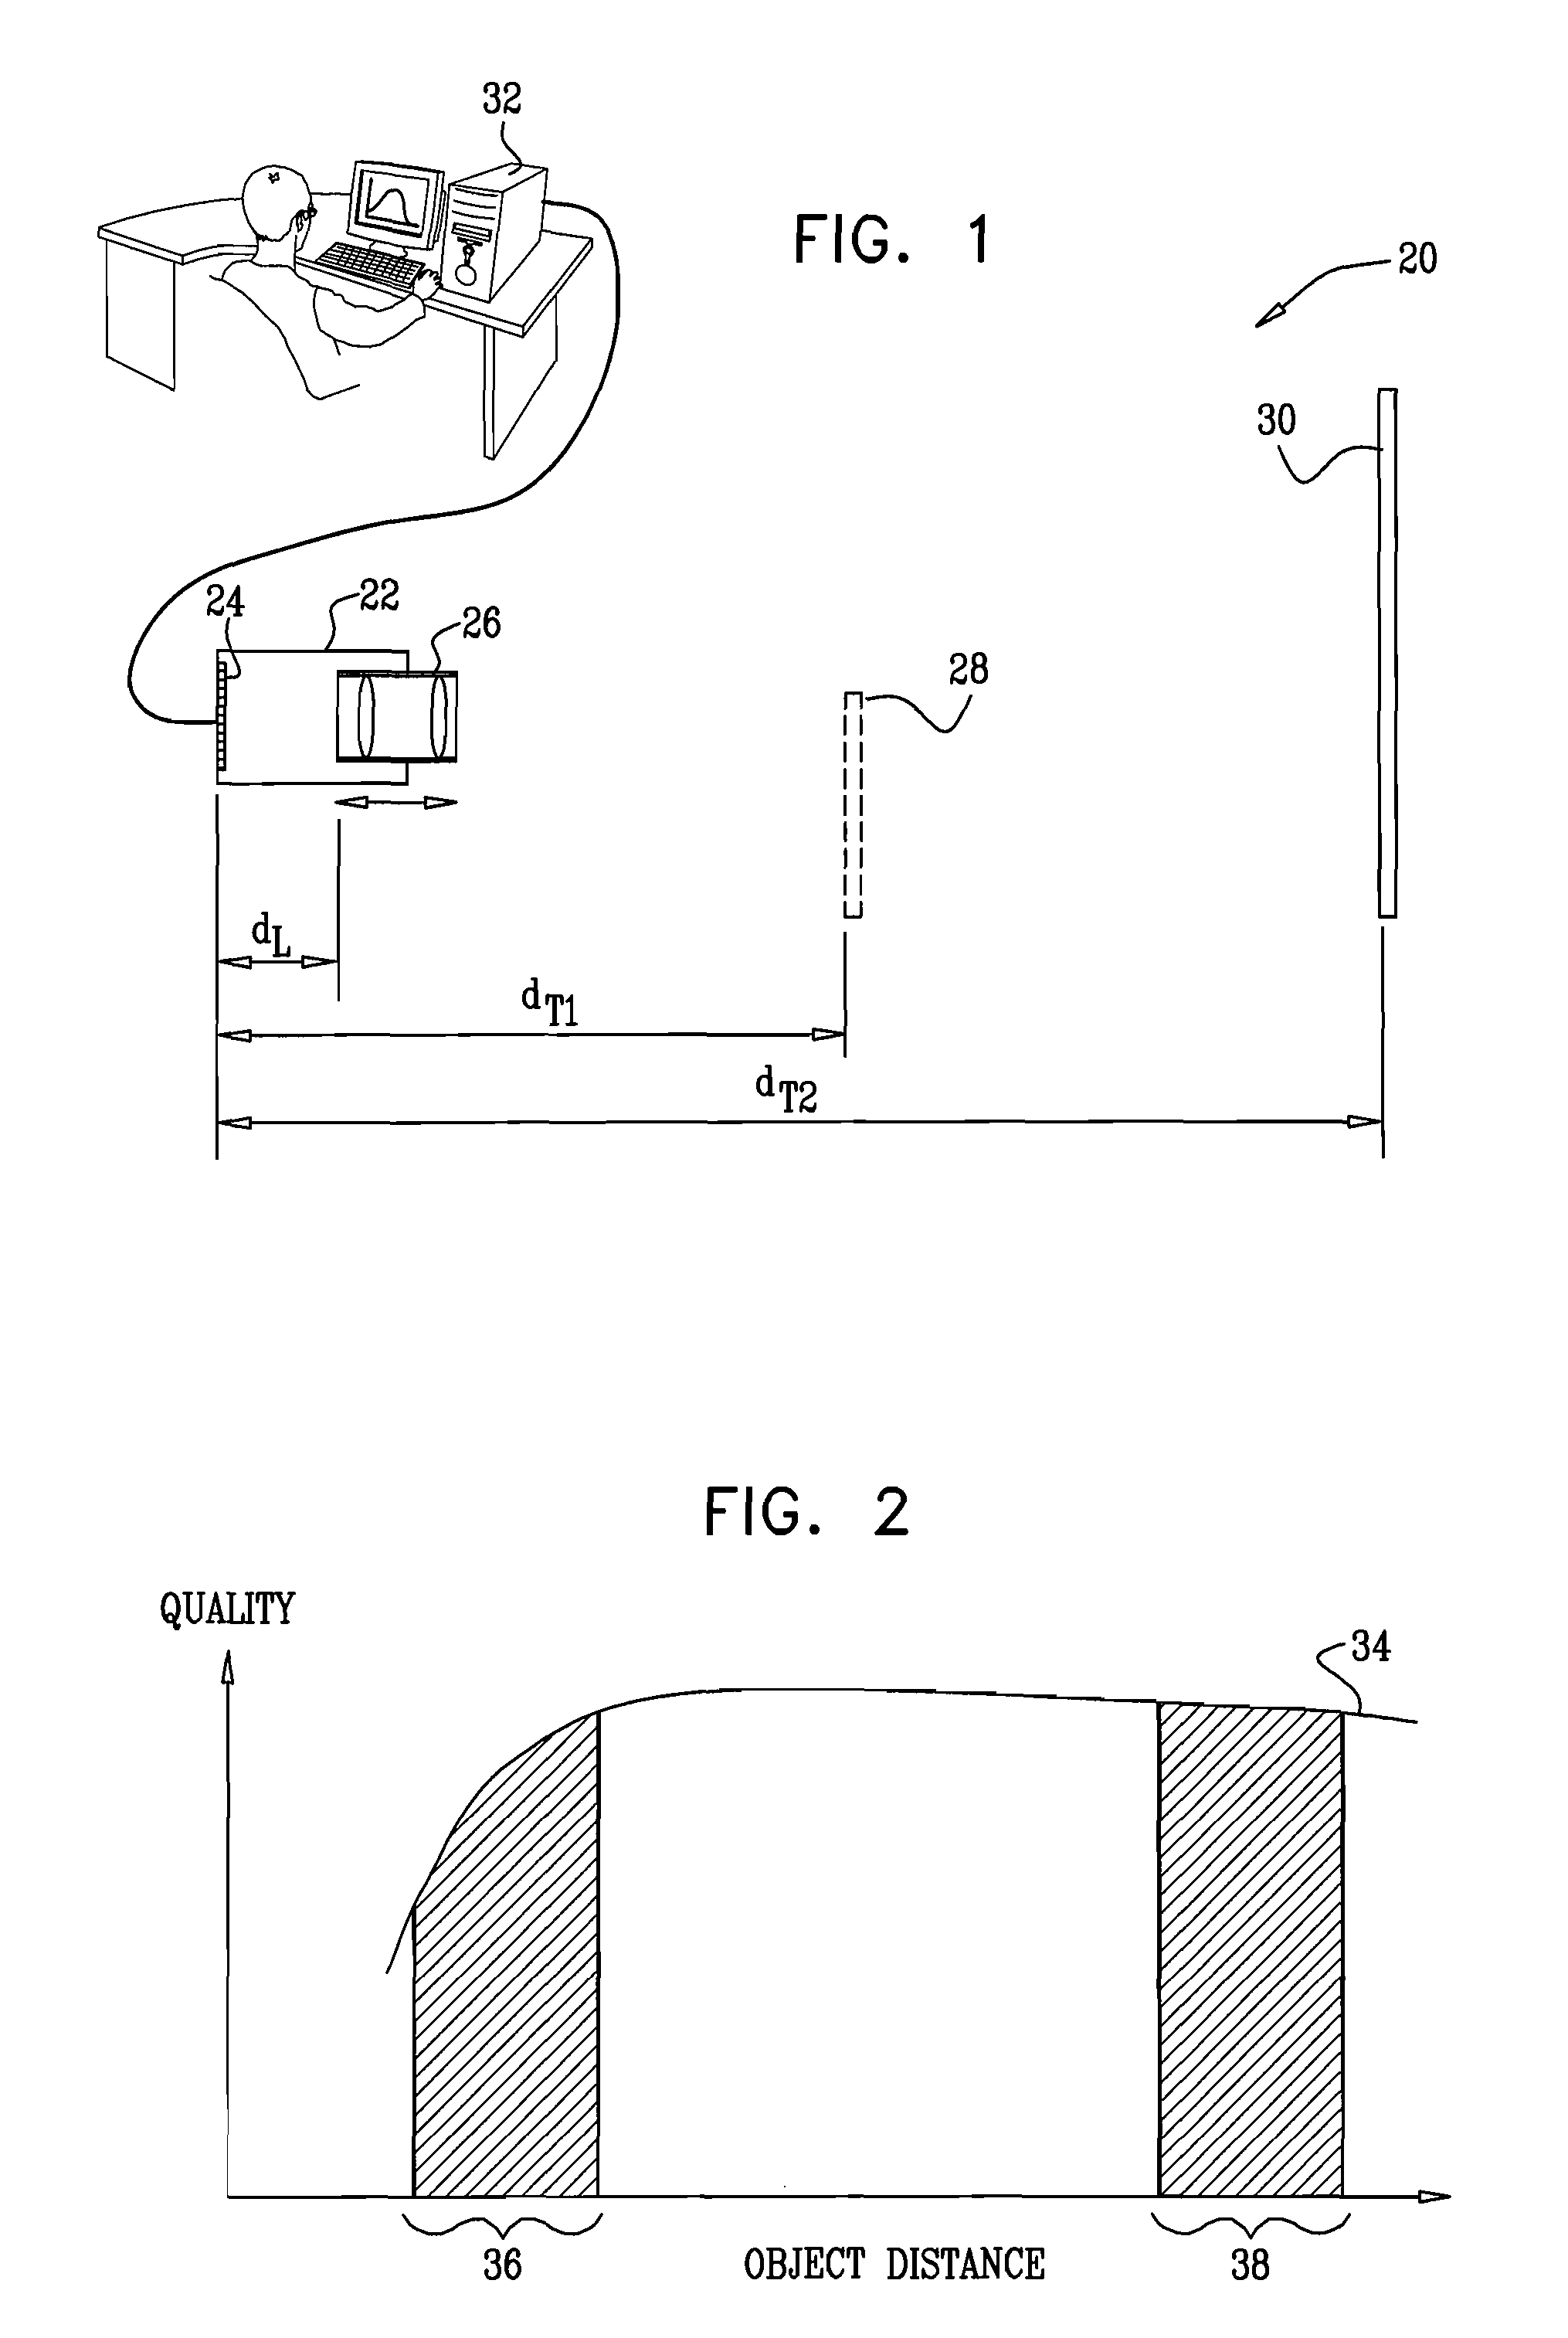 Optical alignment of cameras with extended depth of field